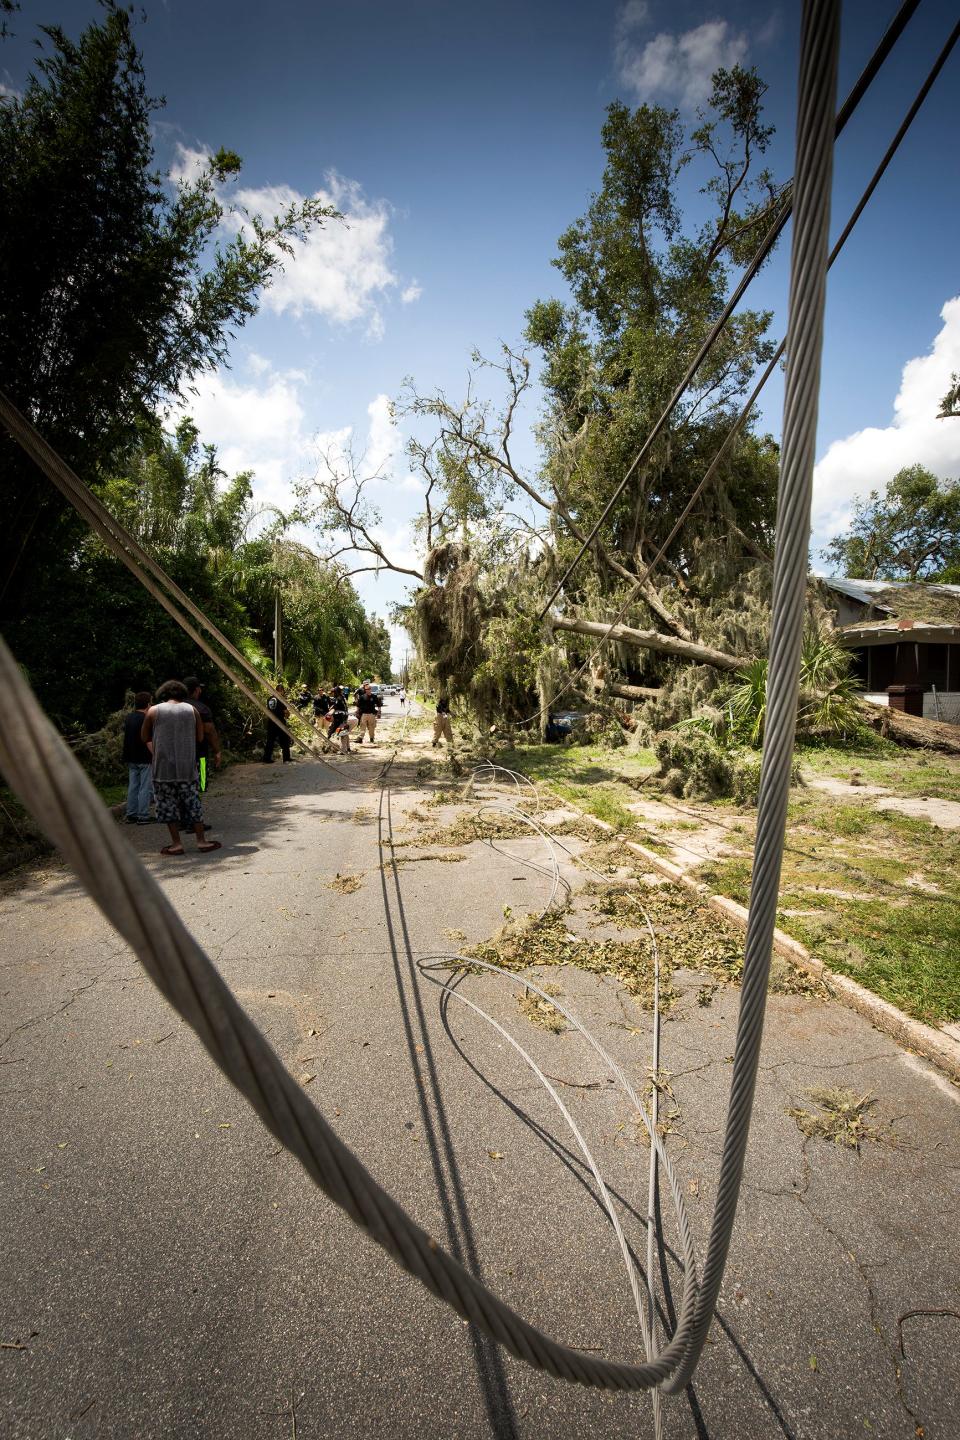 Florida Highway Patrol Troop C members clear a downed tree that crashed on a car and took down power lines in the Dixieland area of Lakeland after Hurricane Irma in 2017.